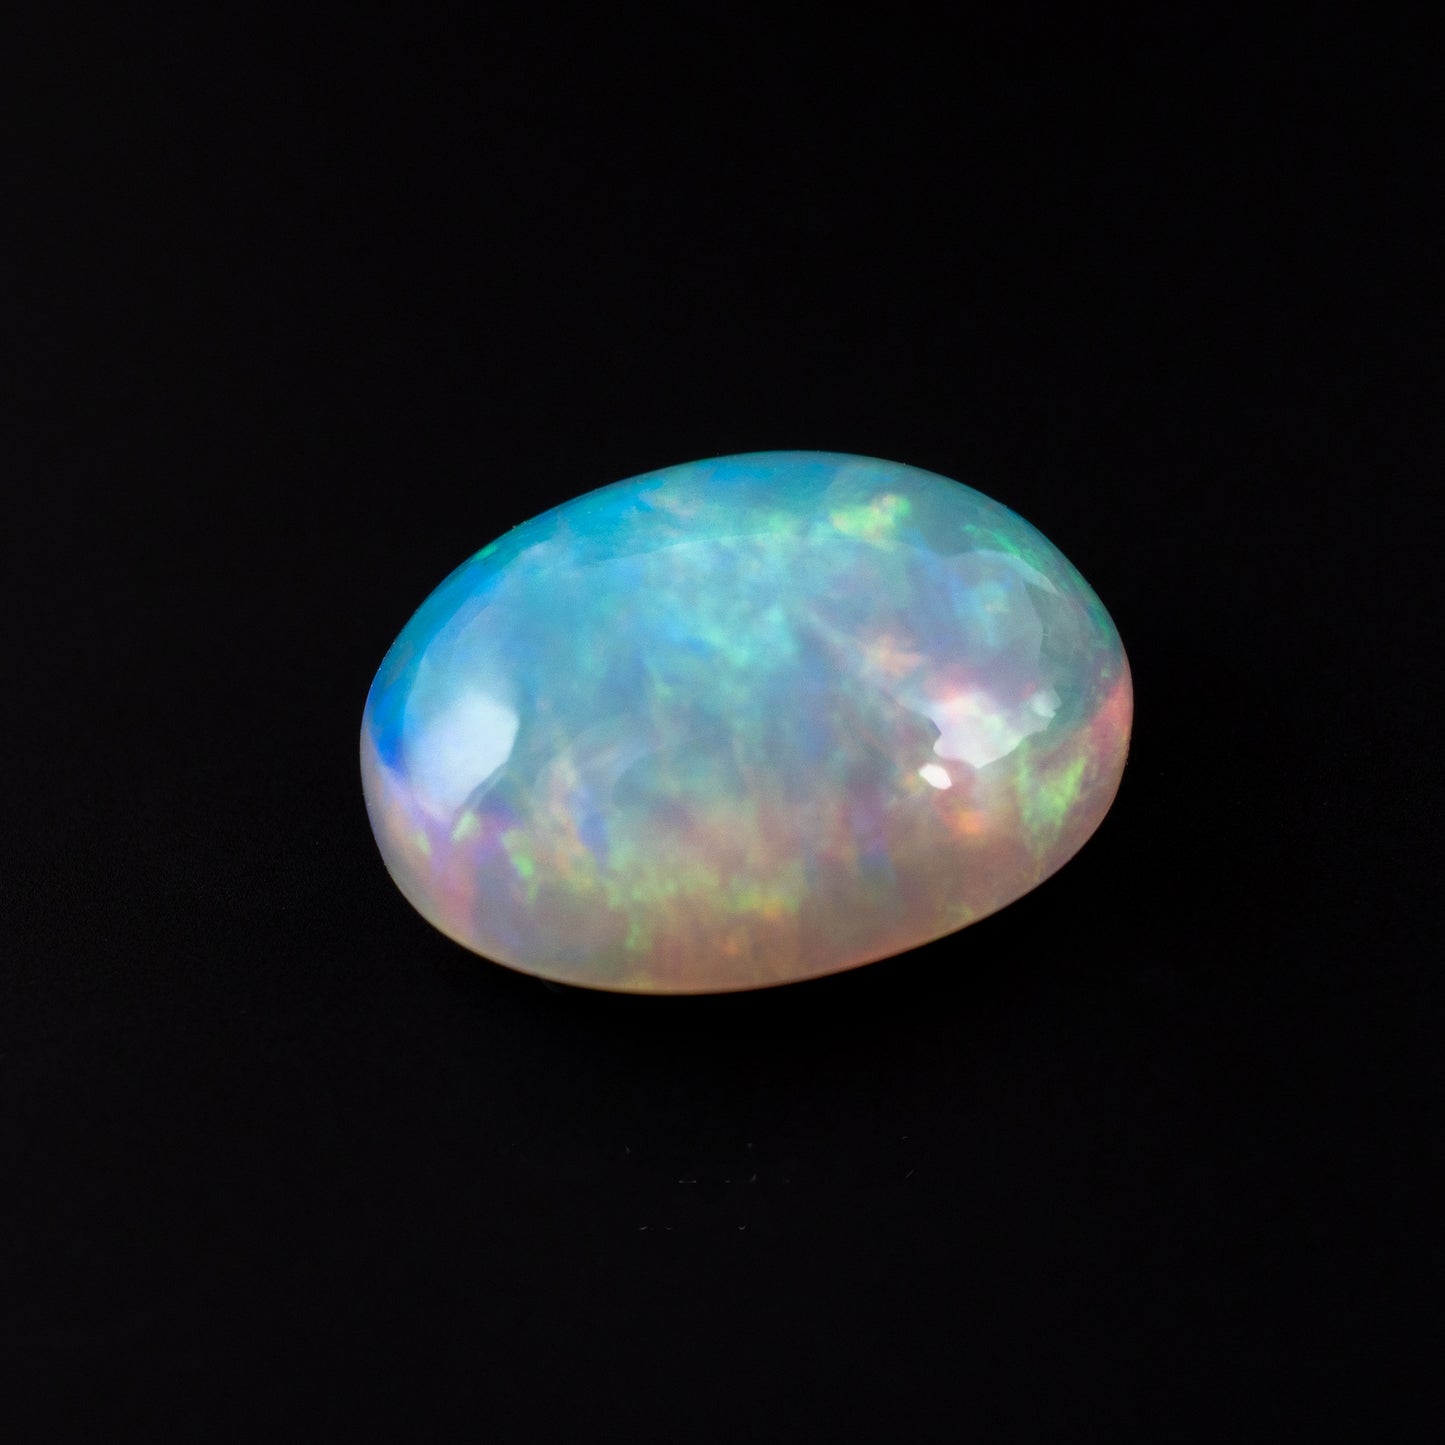 Natural Loose Opal 9.44 Carats With Report Card - Hunters Fine Jewellery